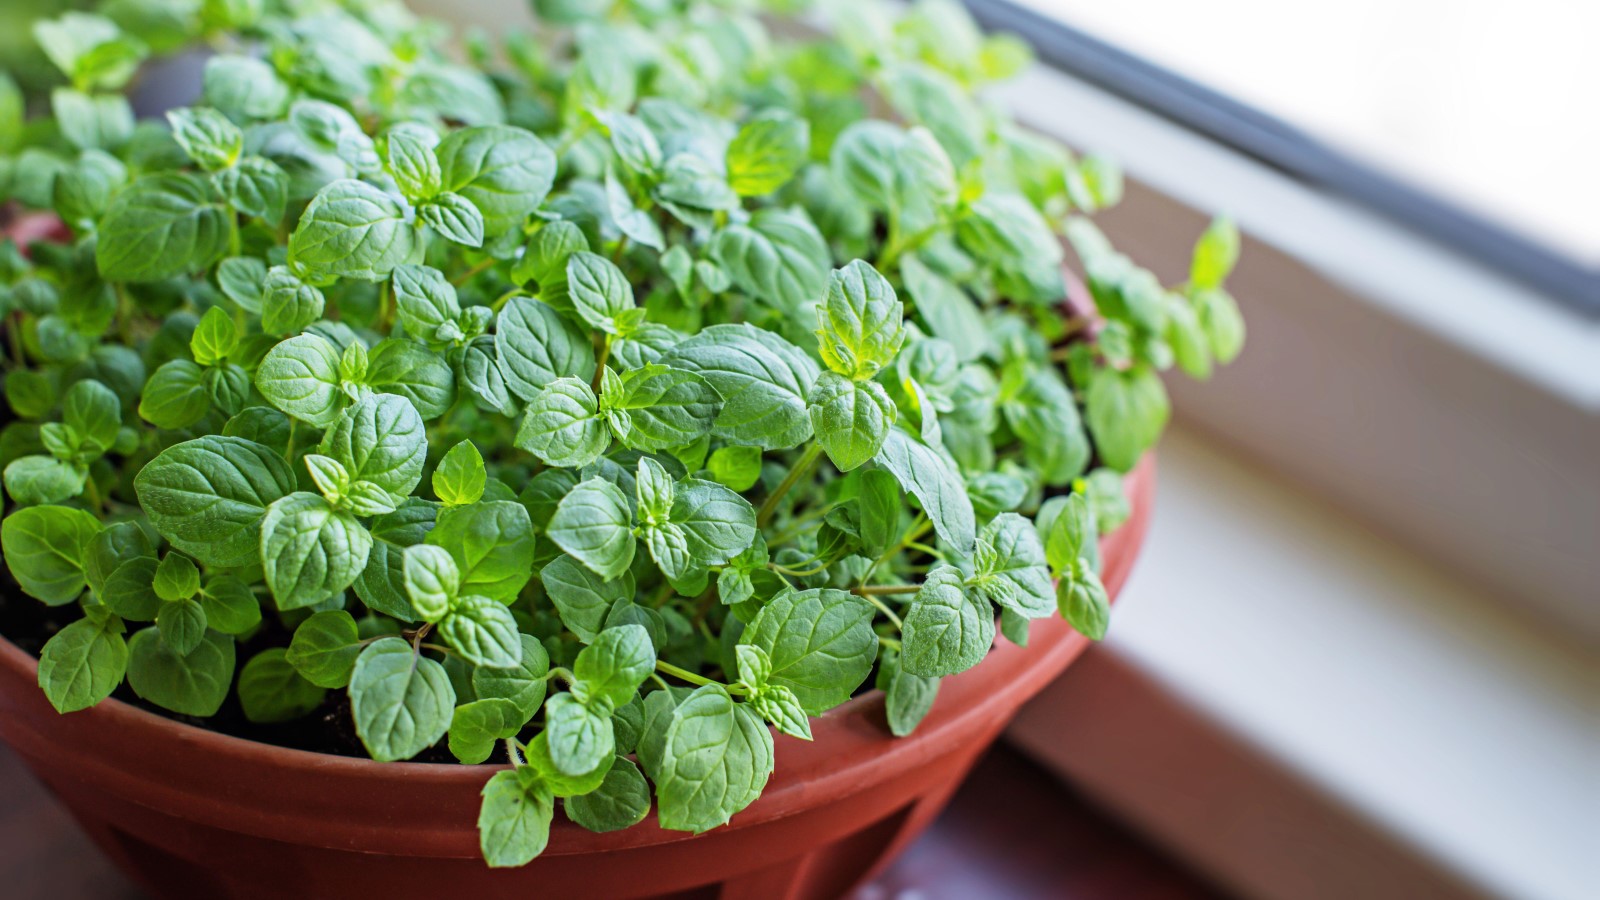 How to grow mint indoors: expert tips for windowsill crops